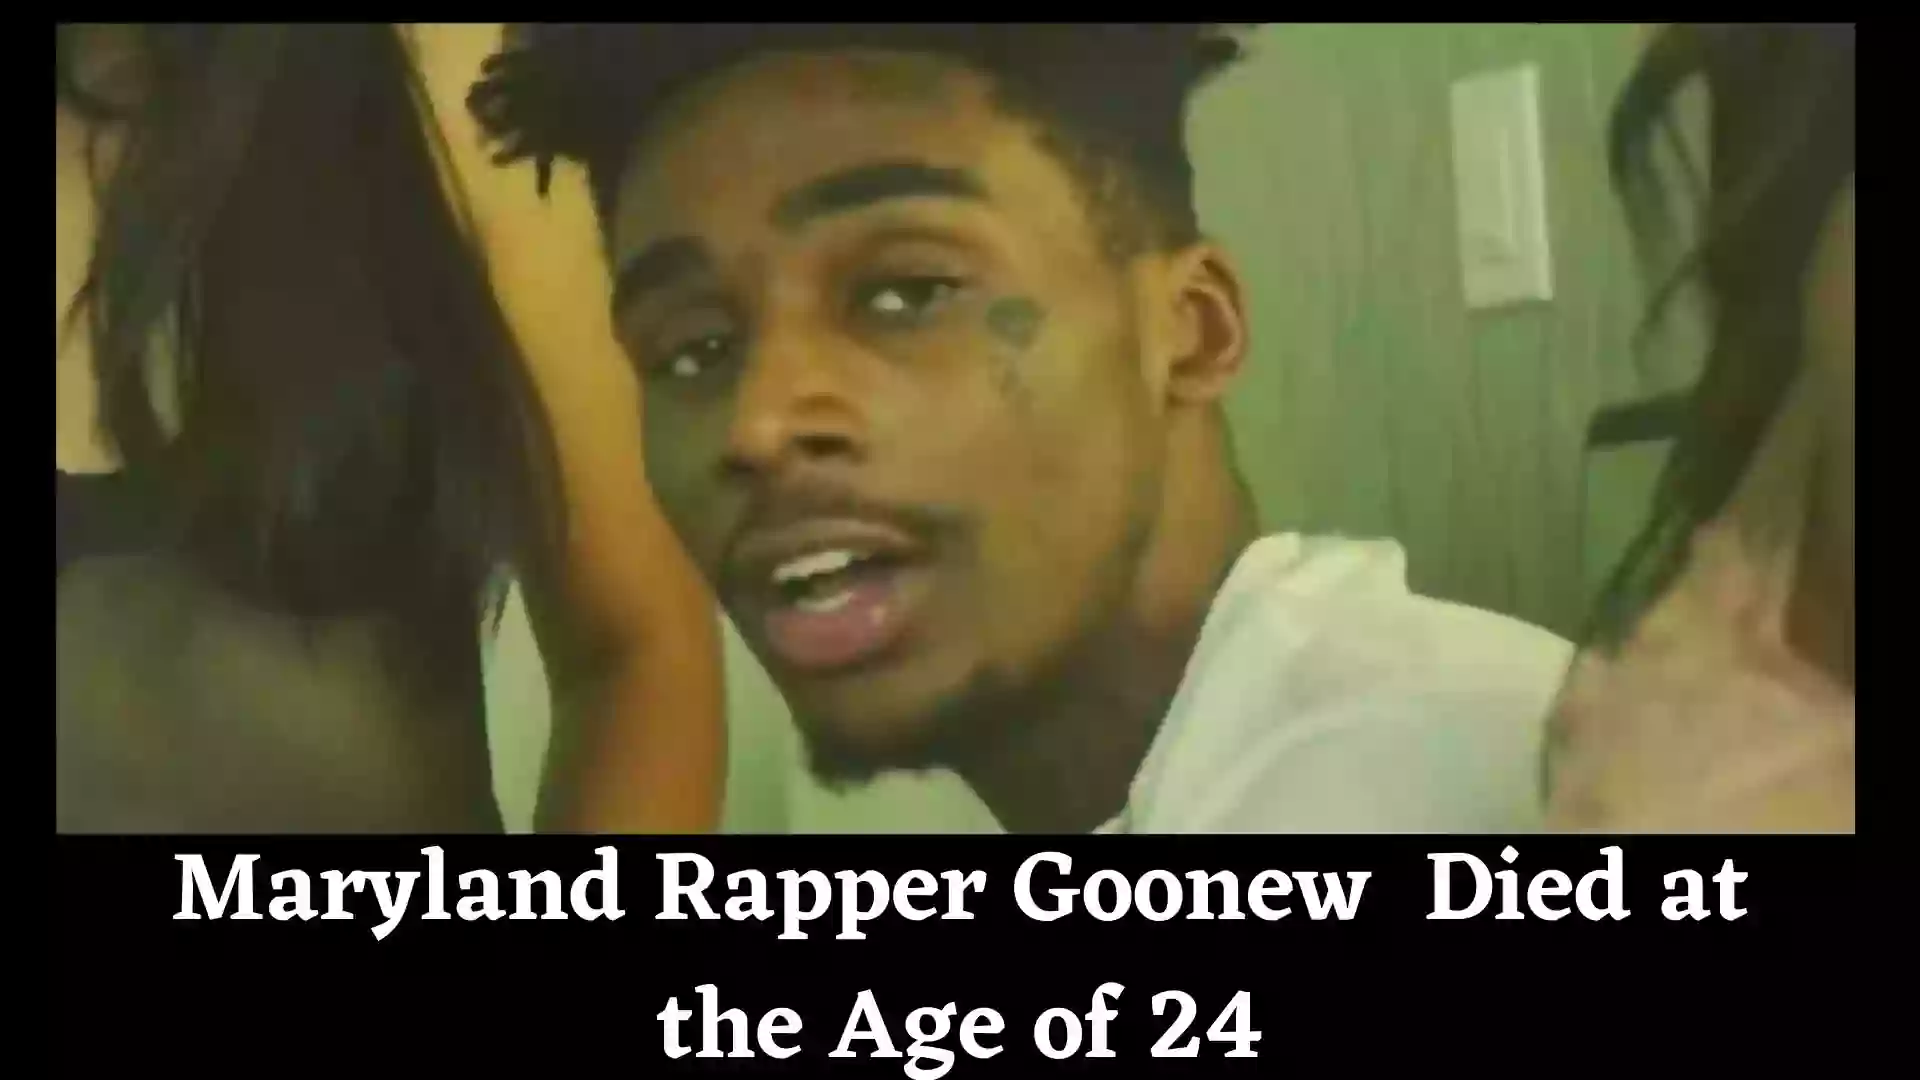 Maryland Rapper Goonew Died at the Age of 24